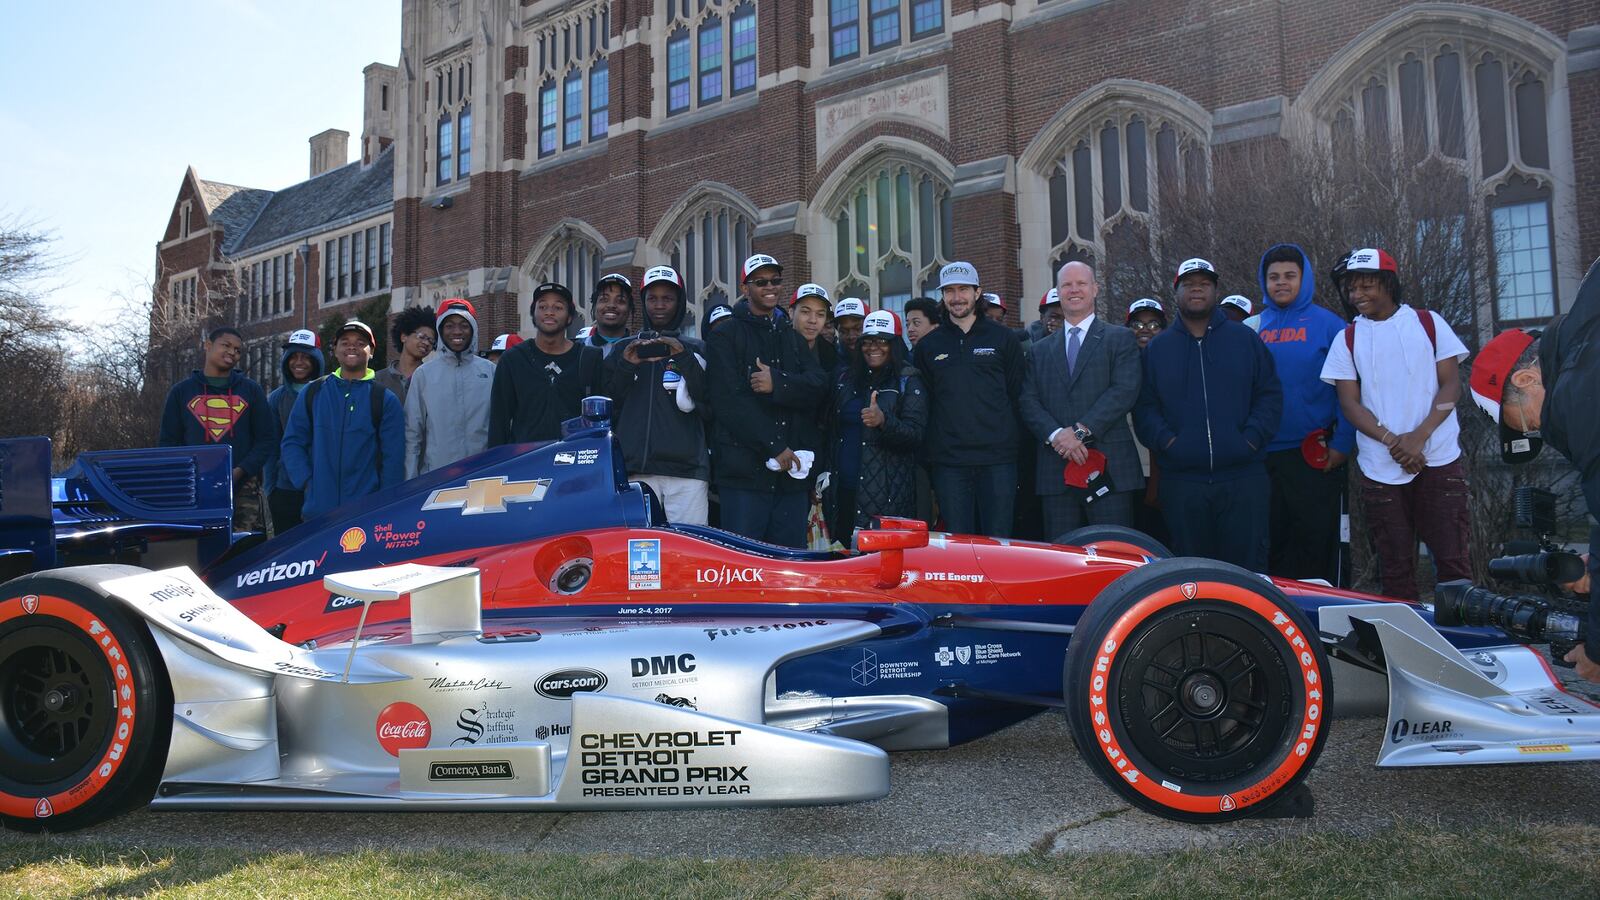 Comerica Bank surprised 50 Detroit Central High School students with the news that they’ll be able to attend the 2017 Chevrolet Detroit Grand Prix. The ninth- through 12th-grade students, who have an interest in robotics and technology, will meet with several racing professionals during a behind-the-scenes tour of race activities on Belle Isle on June 2.